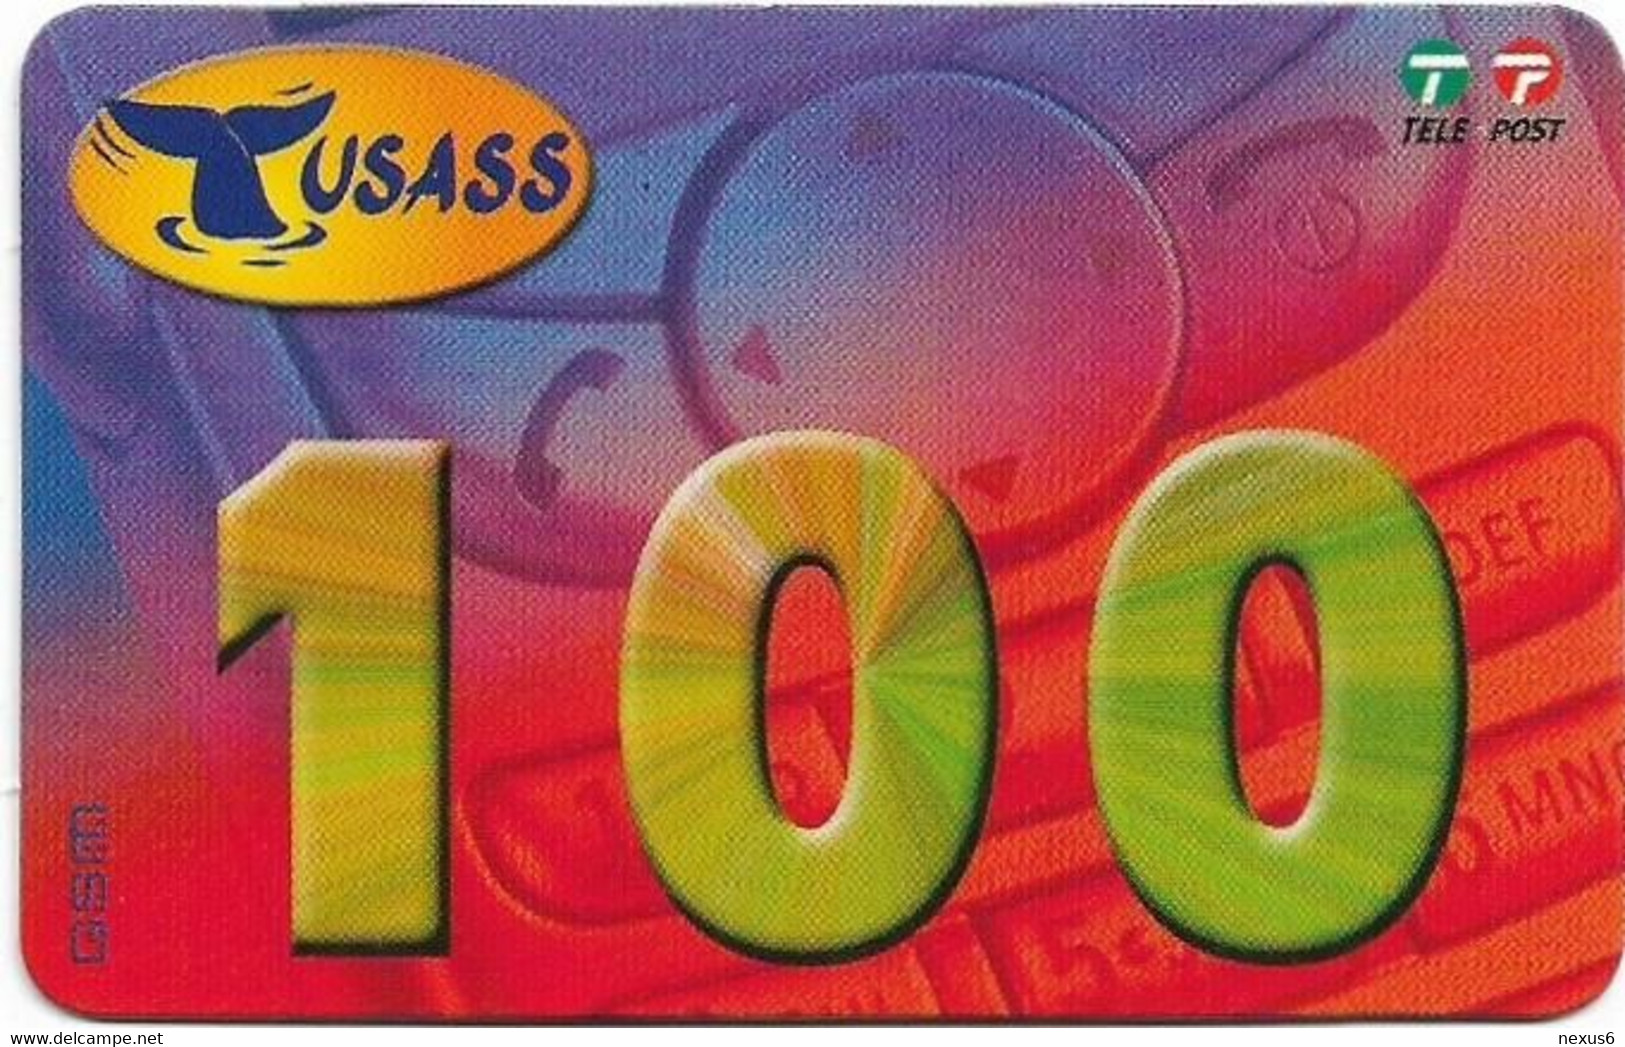 Greenland - Tusass - Purple Red Design, GSM Refill, 100kr. Exp. 01.09.2006, Used - Greenland